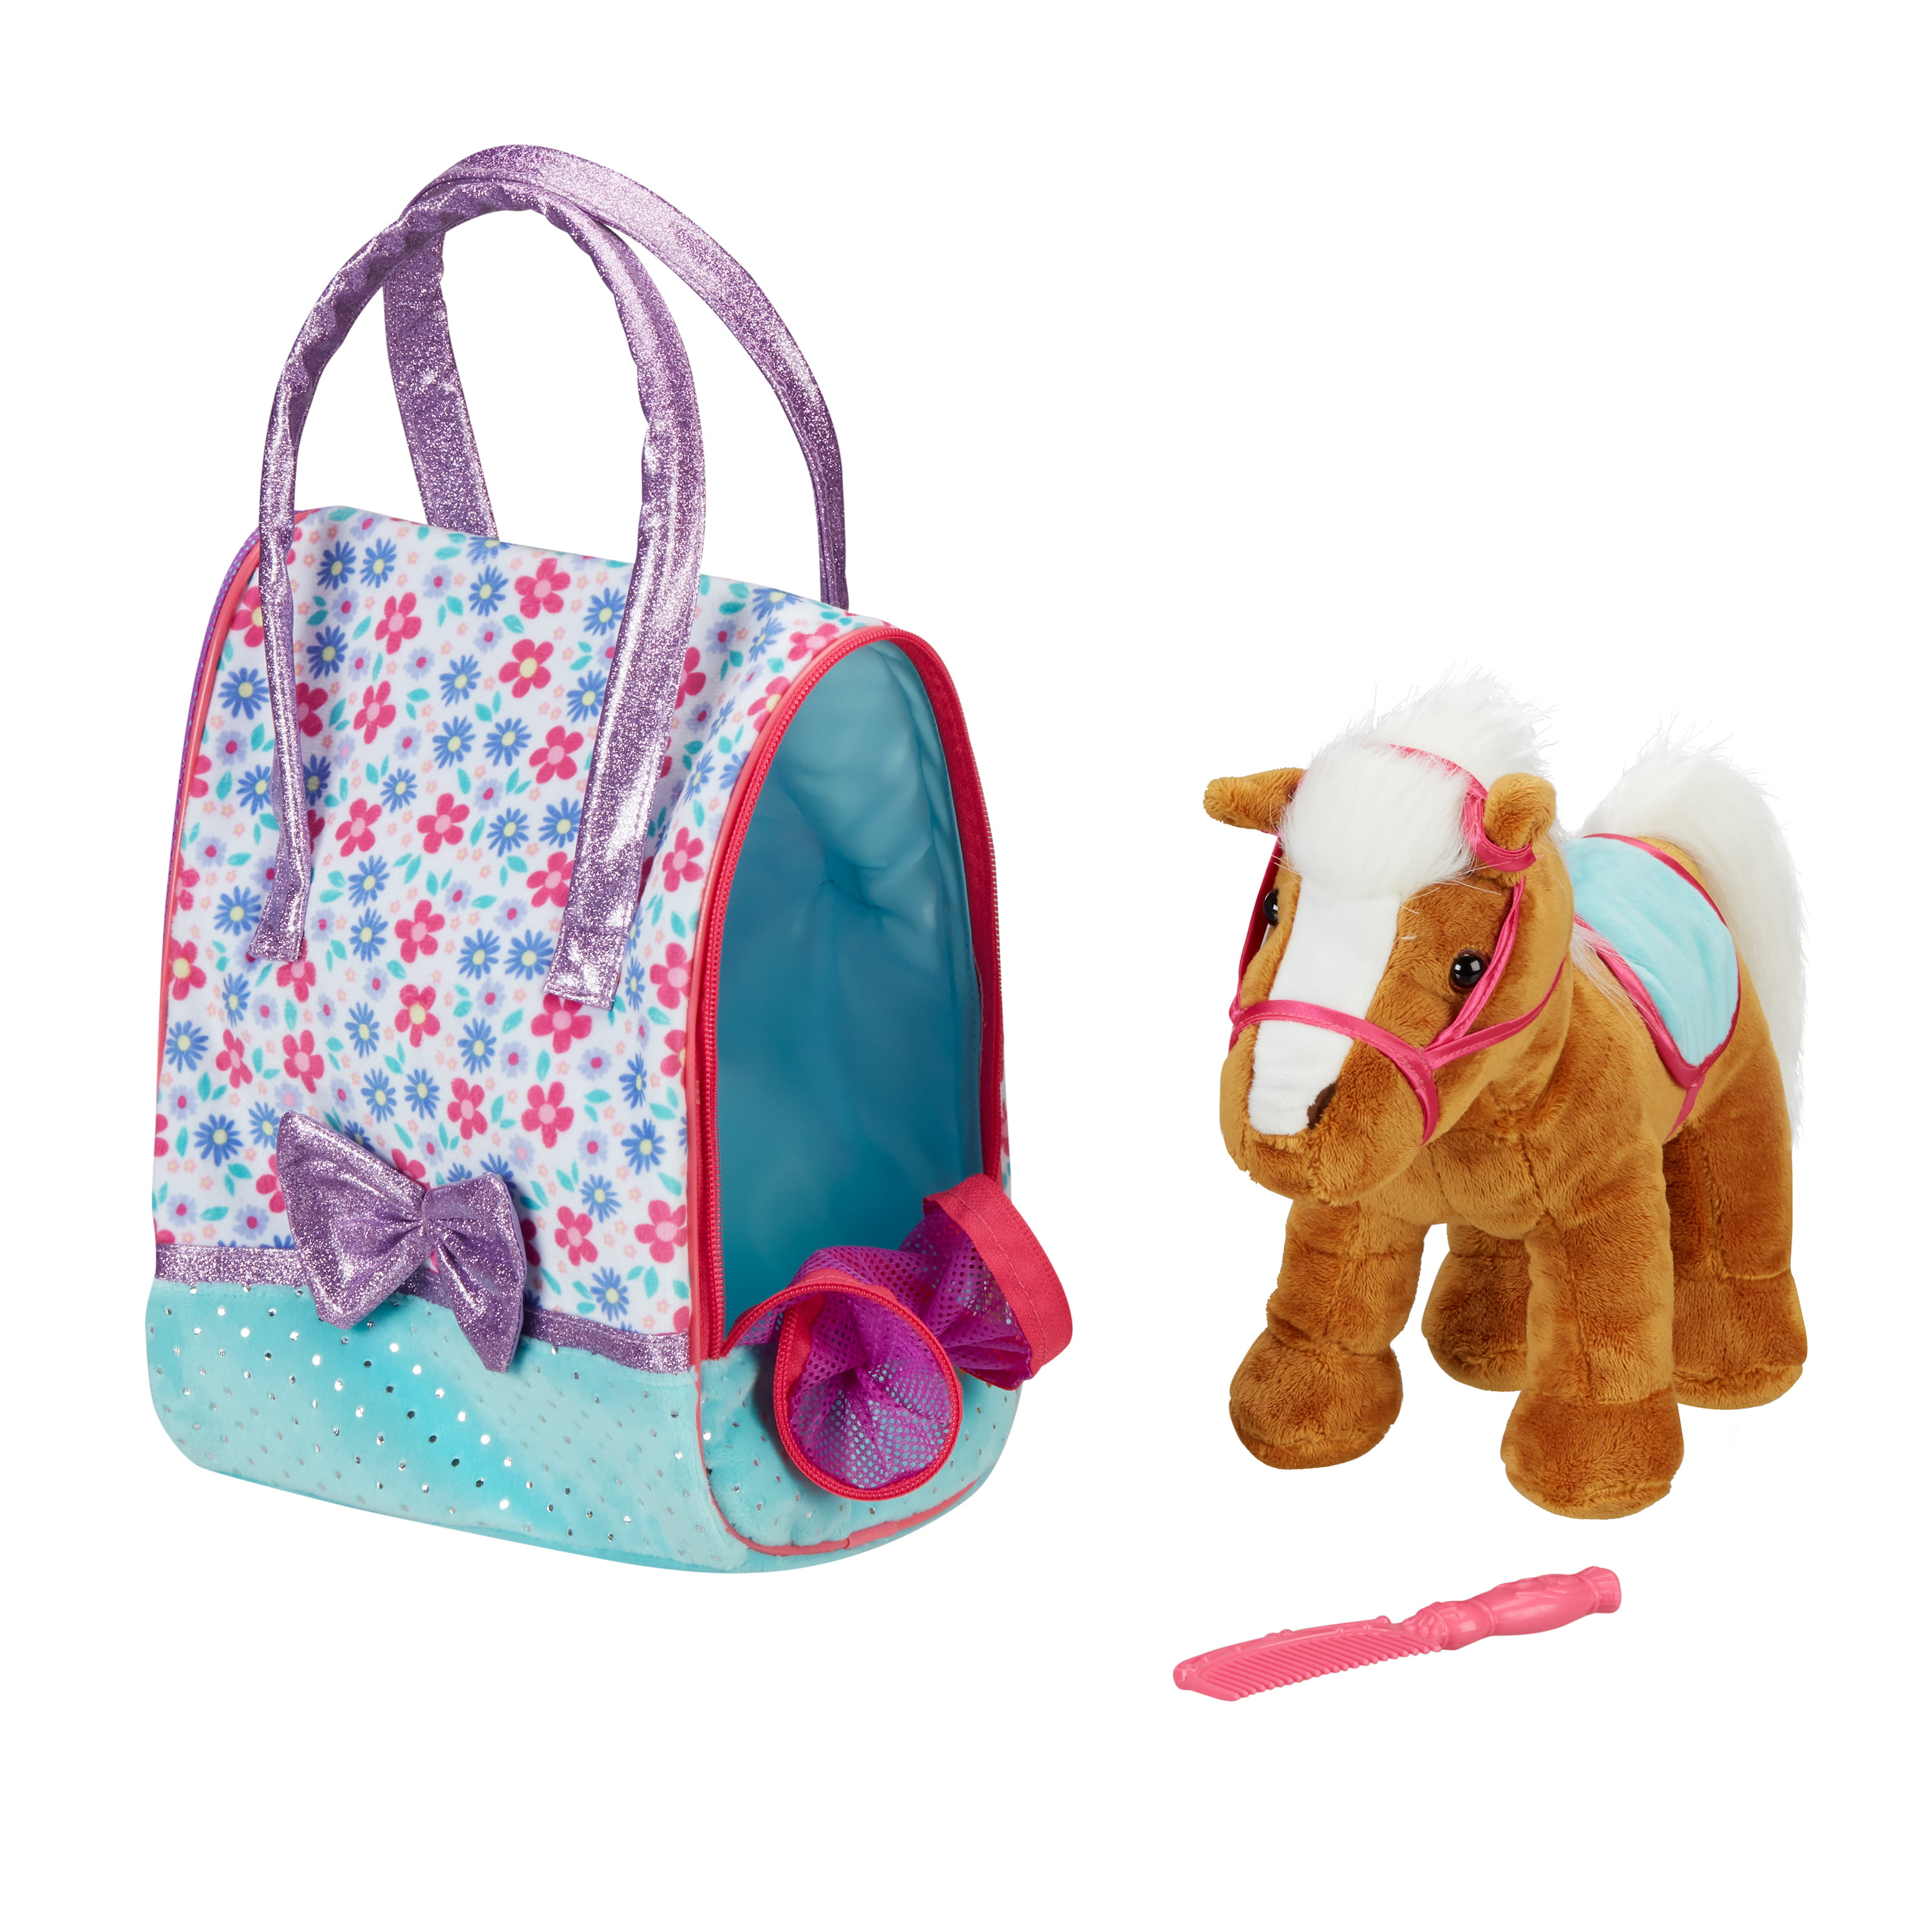 Horse Bag with Horse Stuffed Animal Toy Set, 3 Pieces 